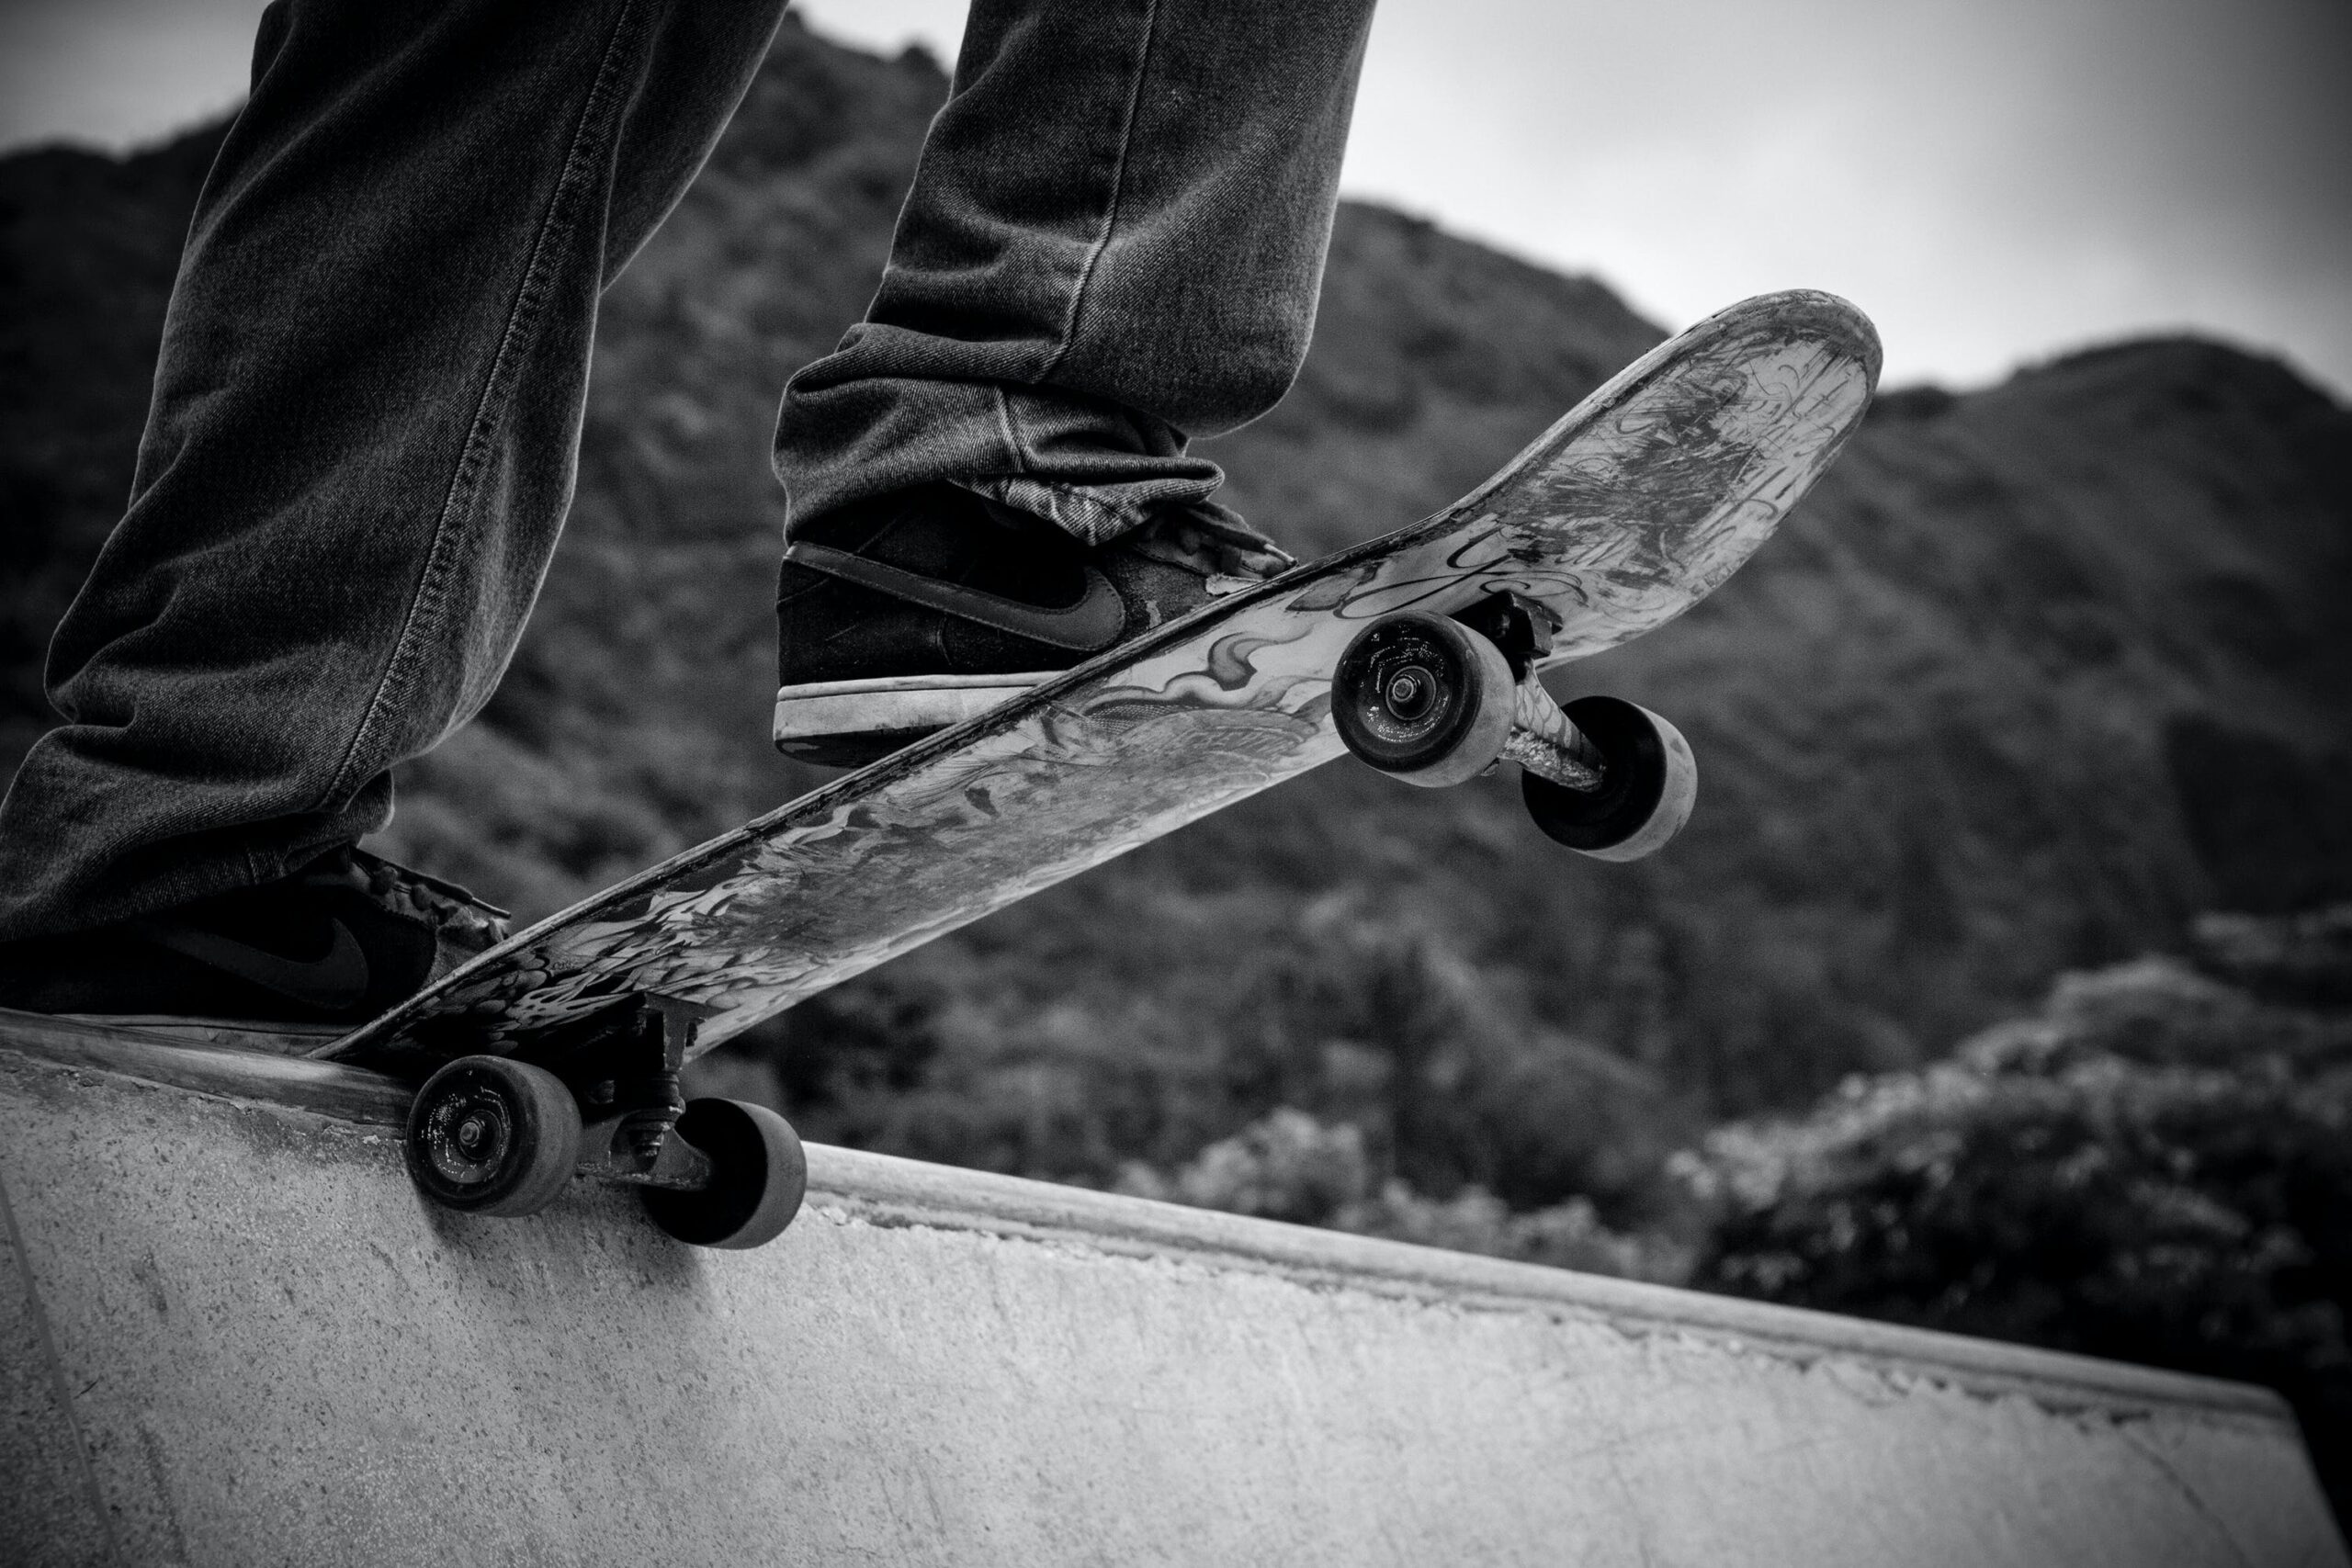 What Are The Key Steps To Learn Skateboard 360 Shuvits?